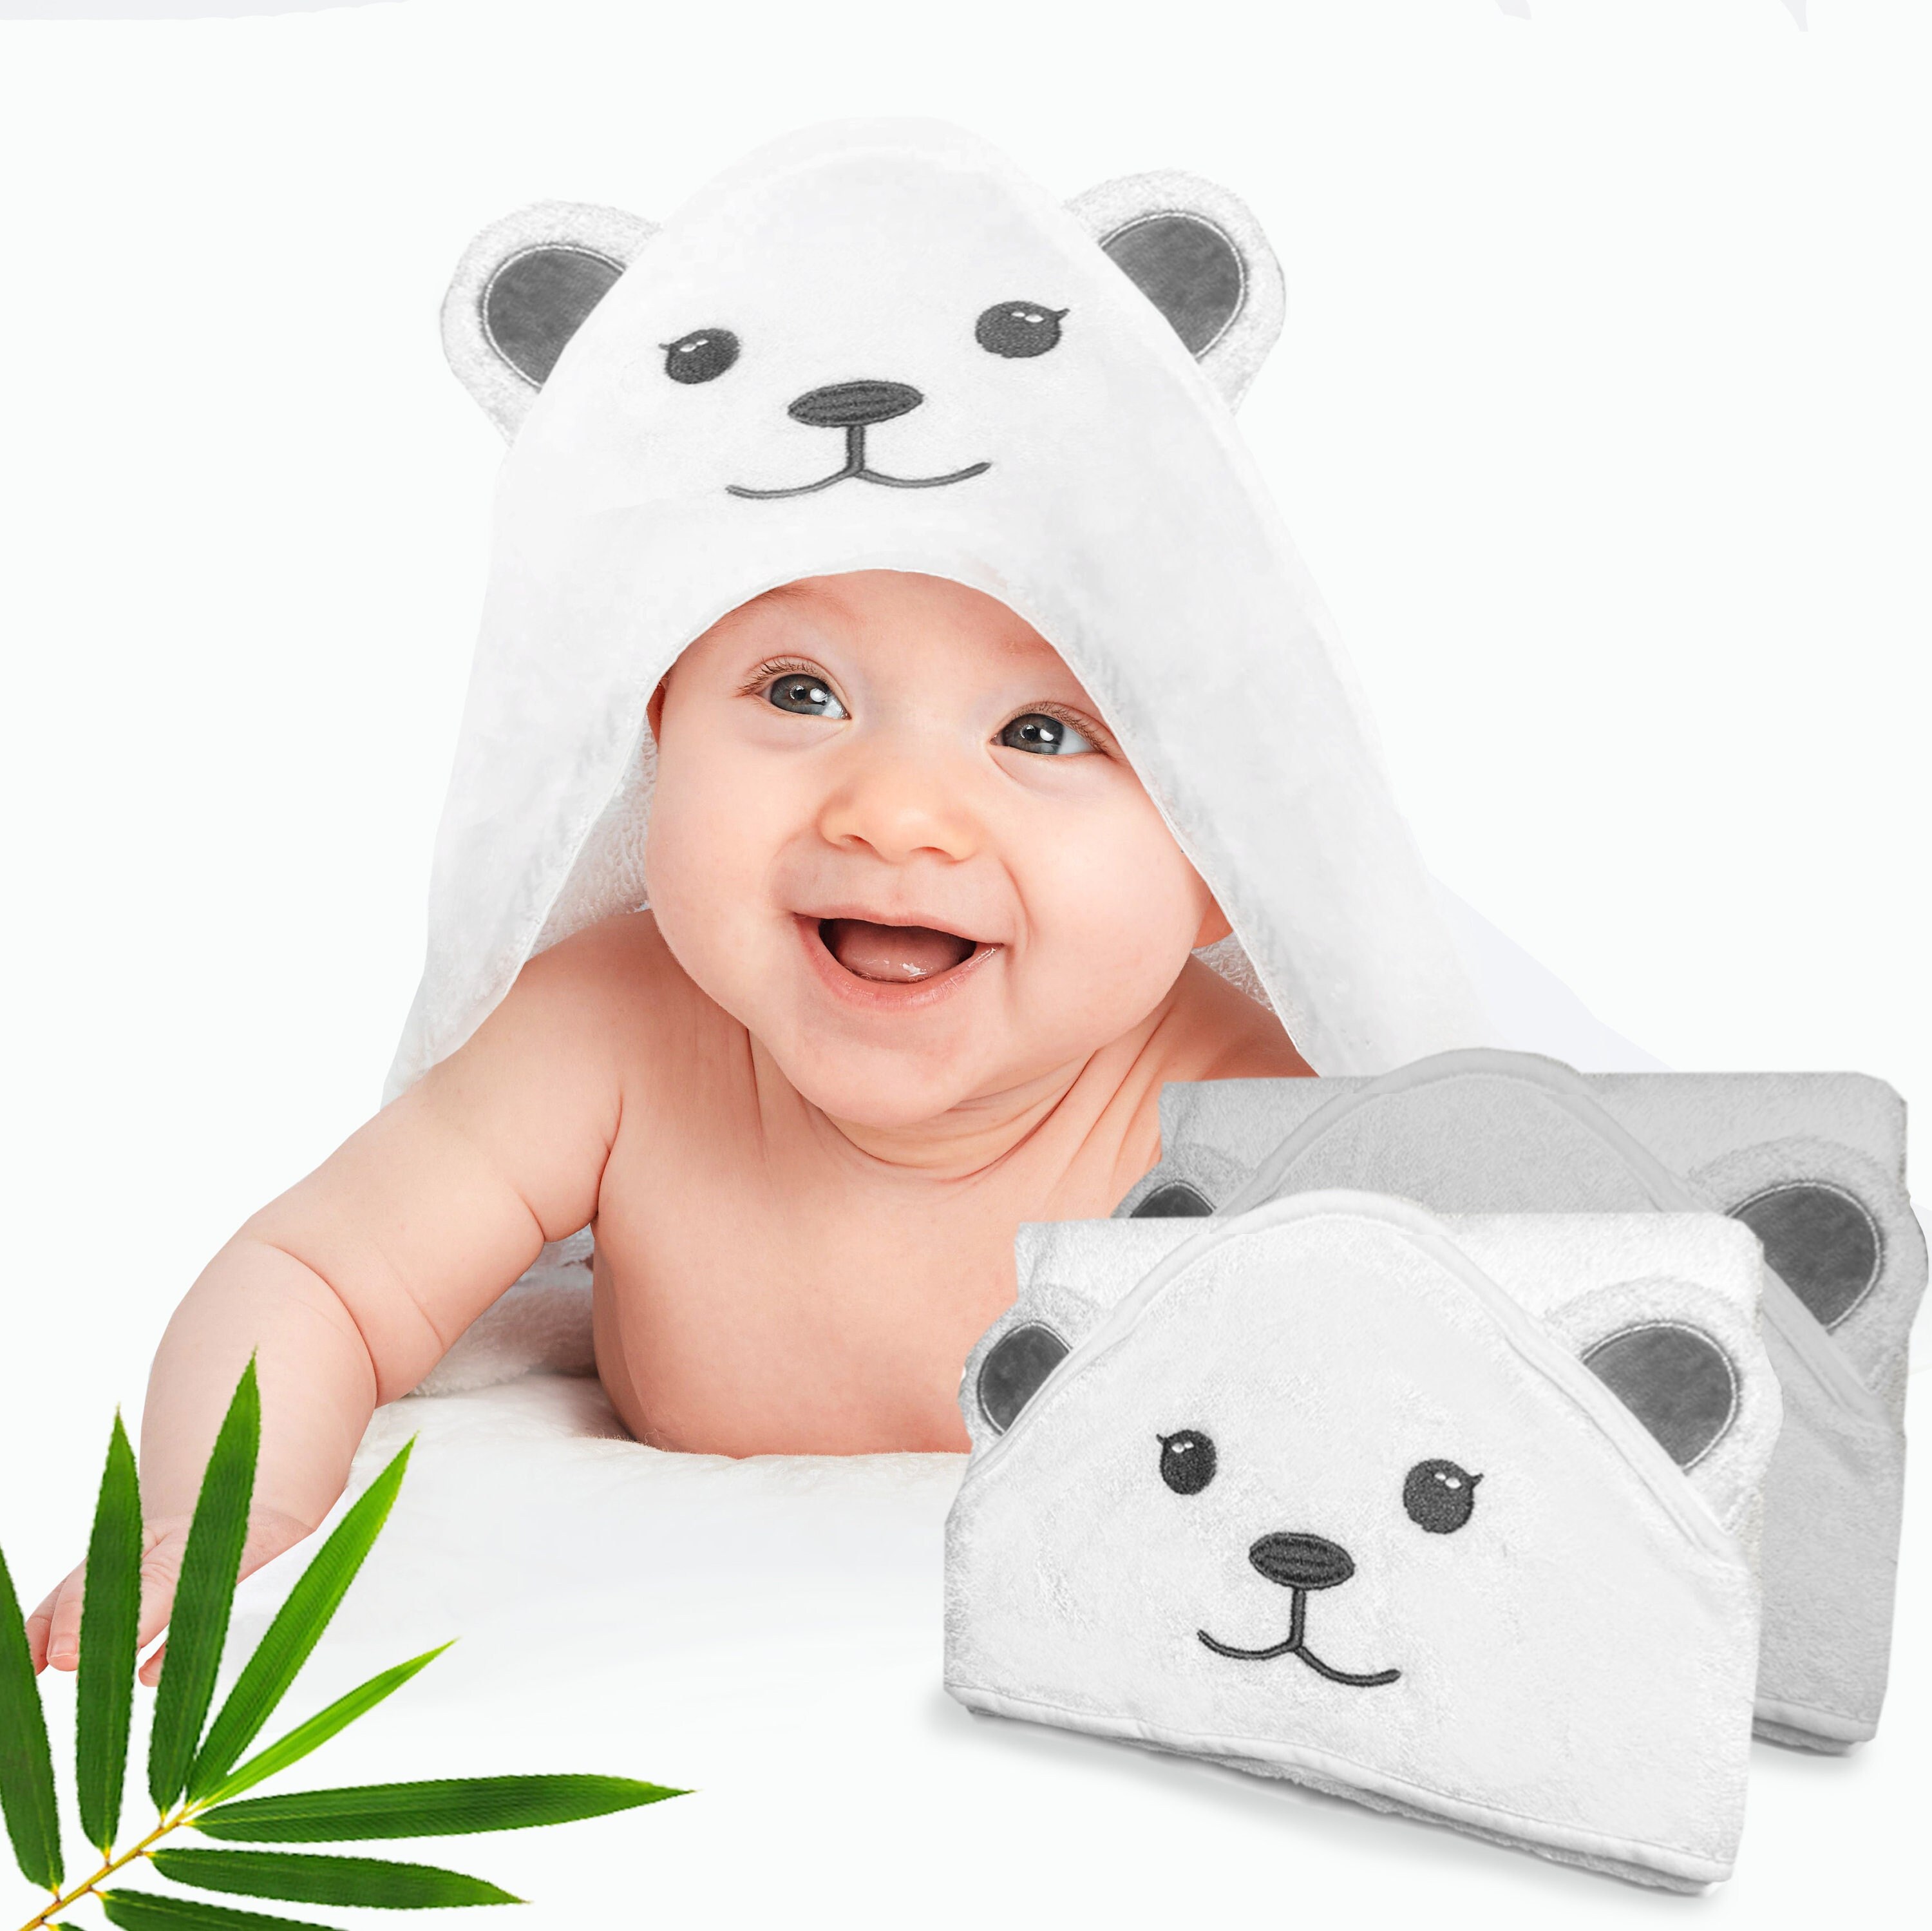 Newborn Baby Shower Gift Toddler Bamboo Infant Towel Soft & Ultra Absorbent Lamb Boy & Girl Unisex Thick XL 40X28 Ultra Soft Rayon from Bamboo Baby Hooded Towel & Washcloth Set 